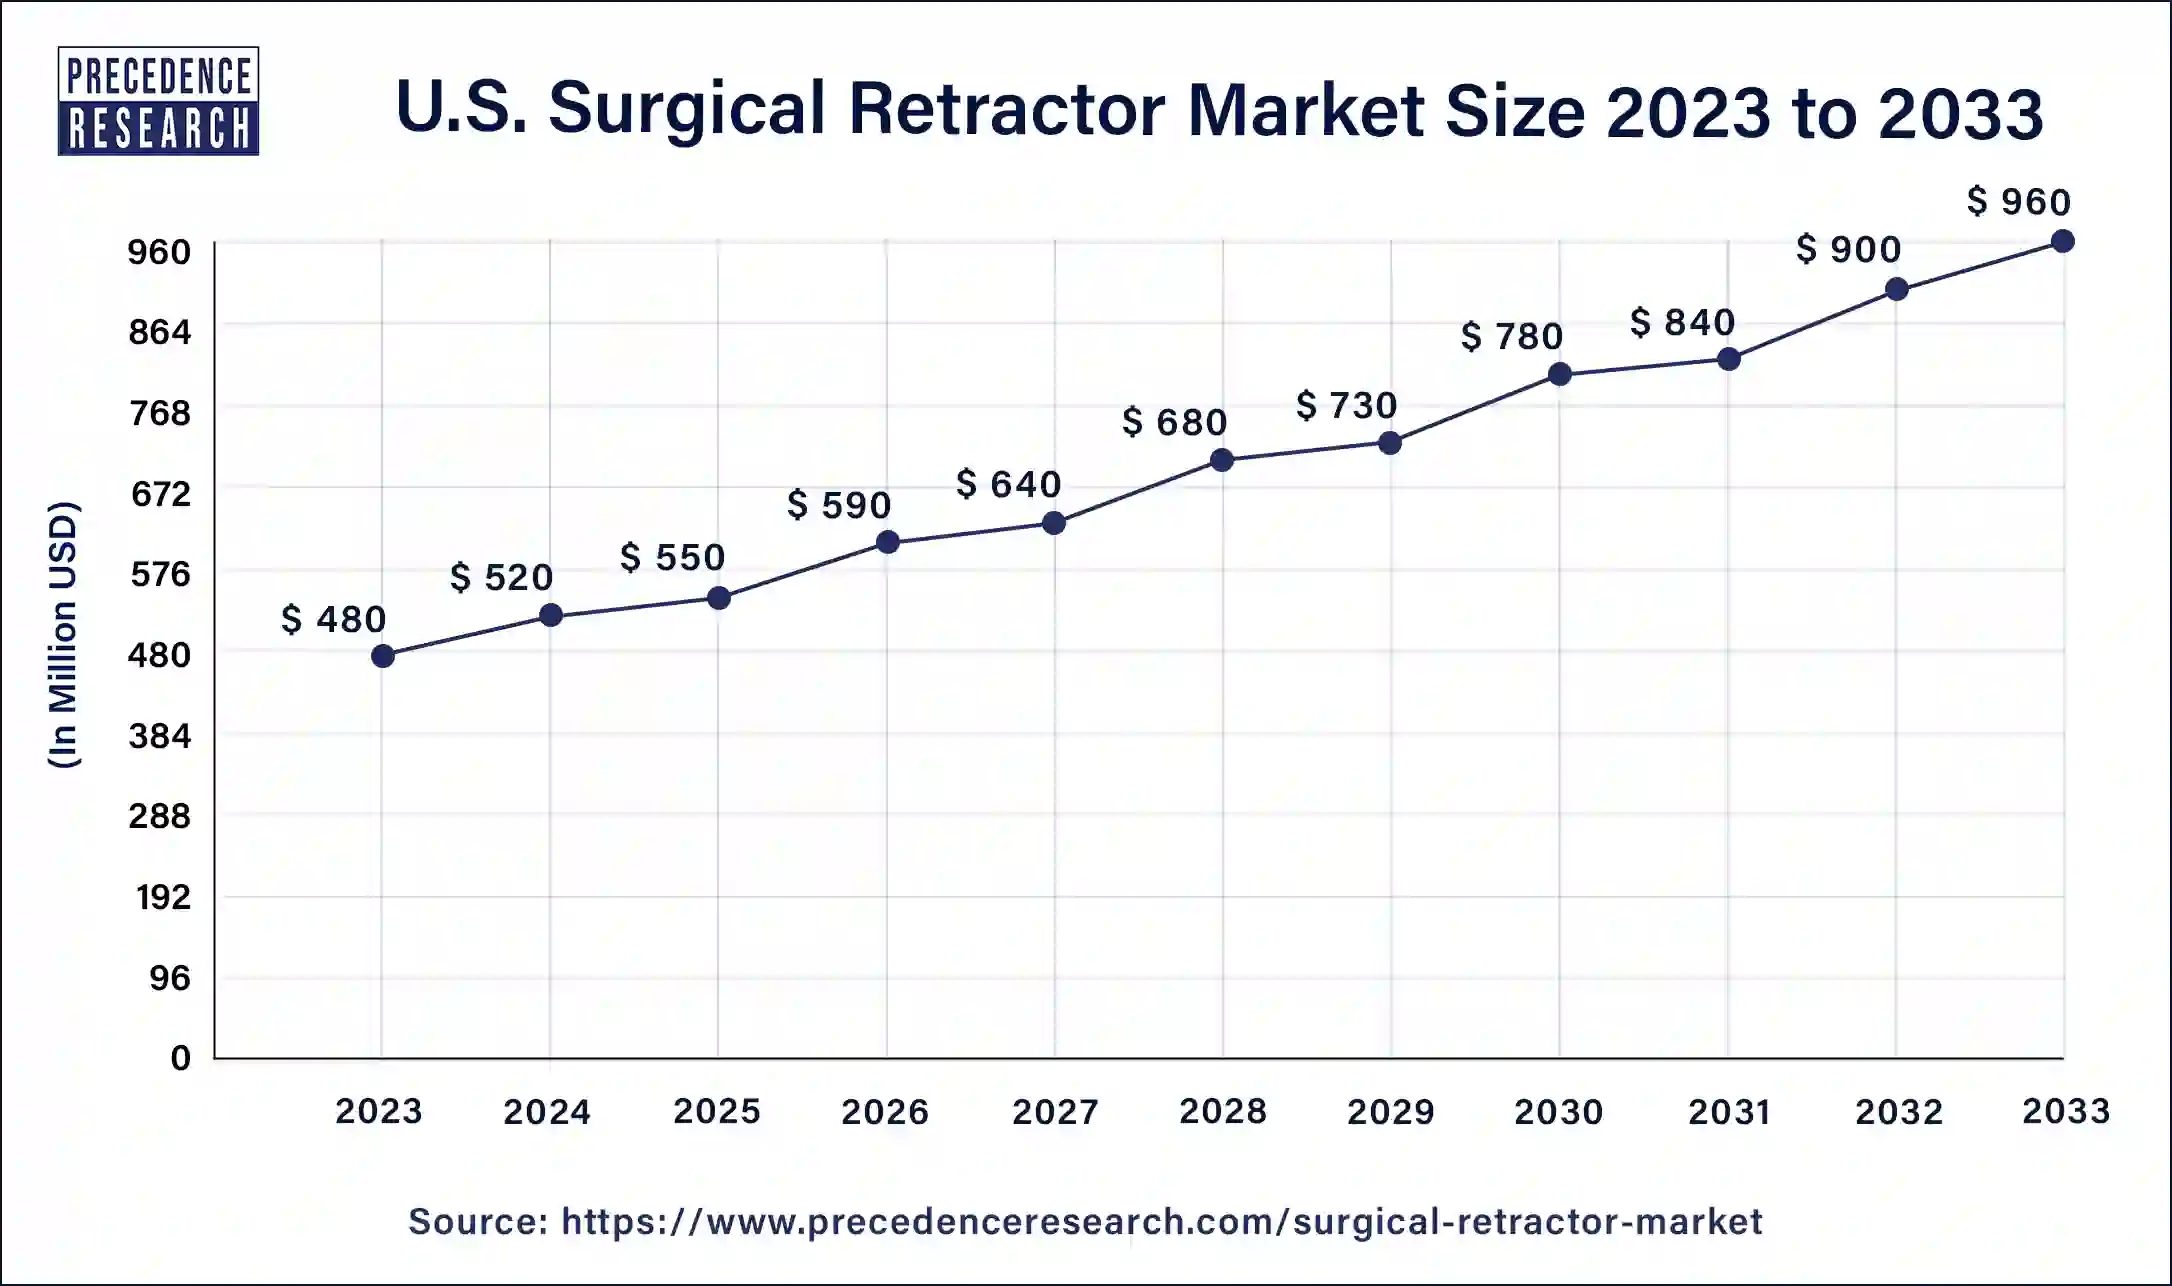 U.S. Surgical Retractor Market Size 2024 to 2033